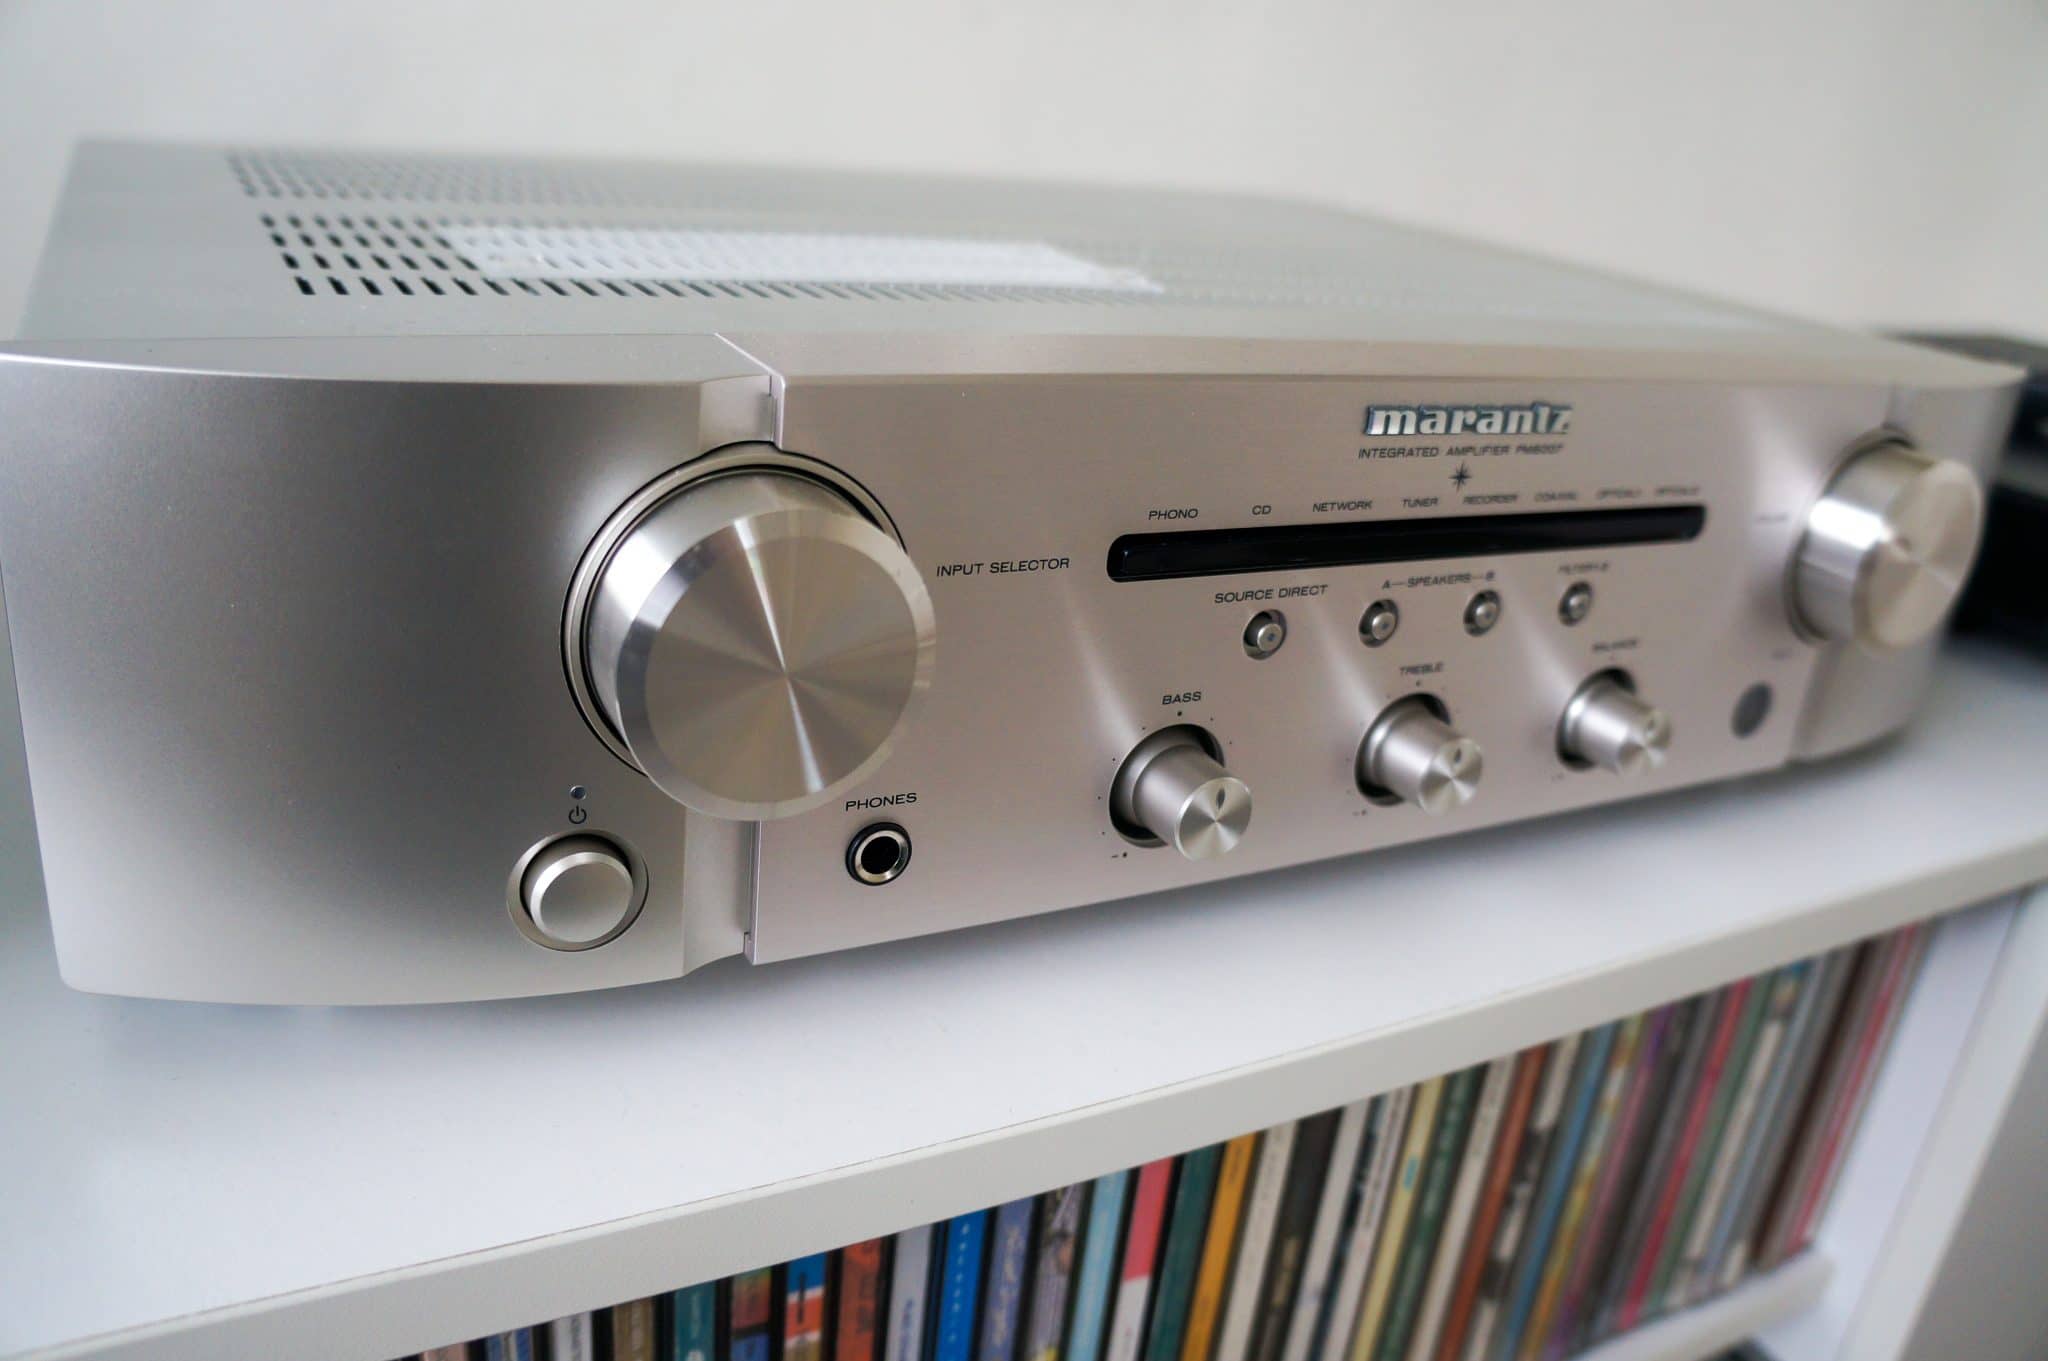 Marantz PM6007 Integrated Amplifier with Digital Connectivity in Black